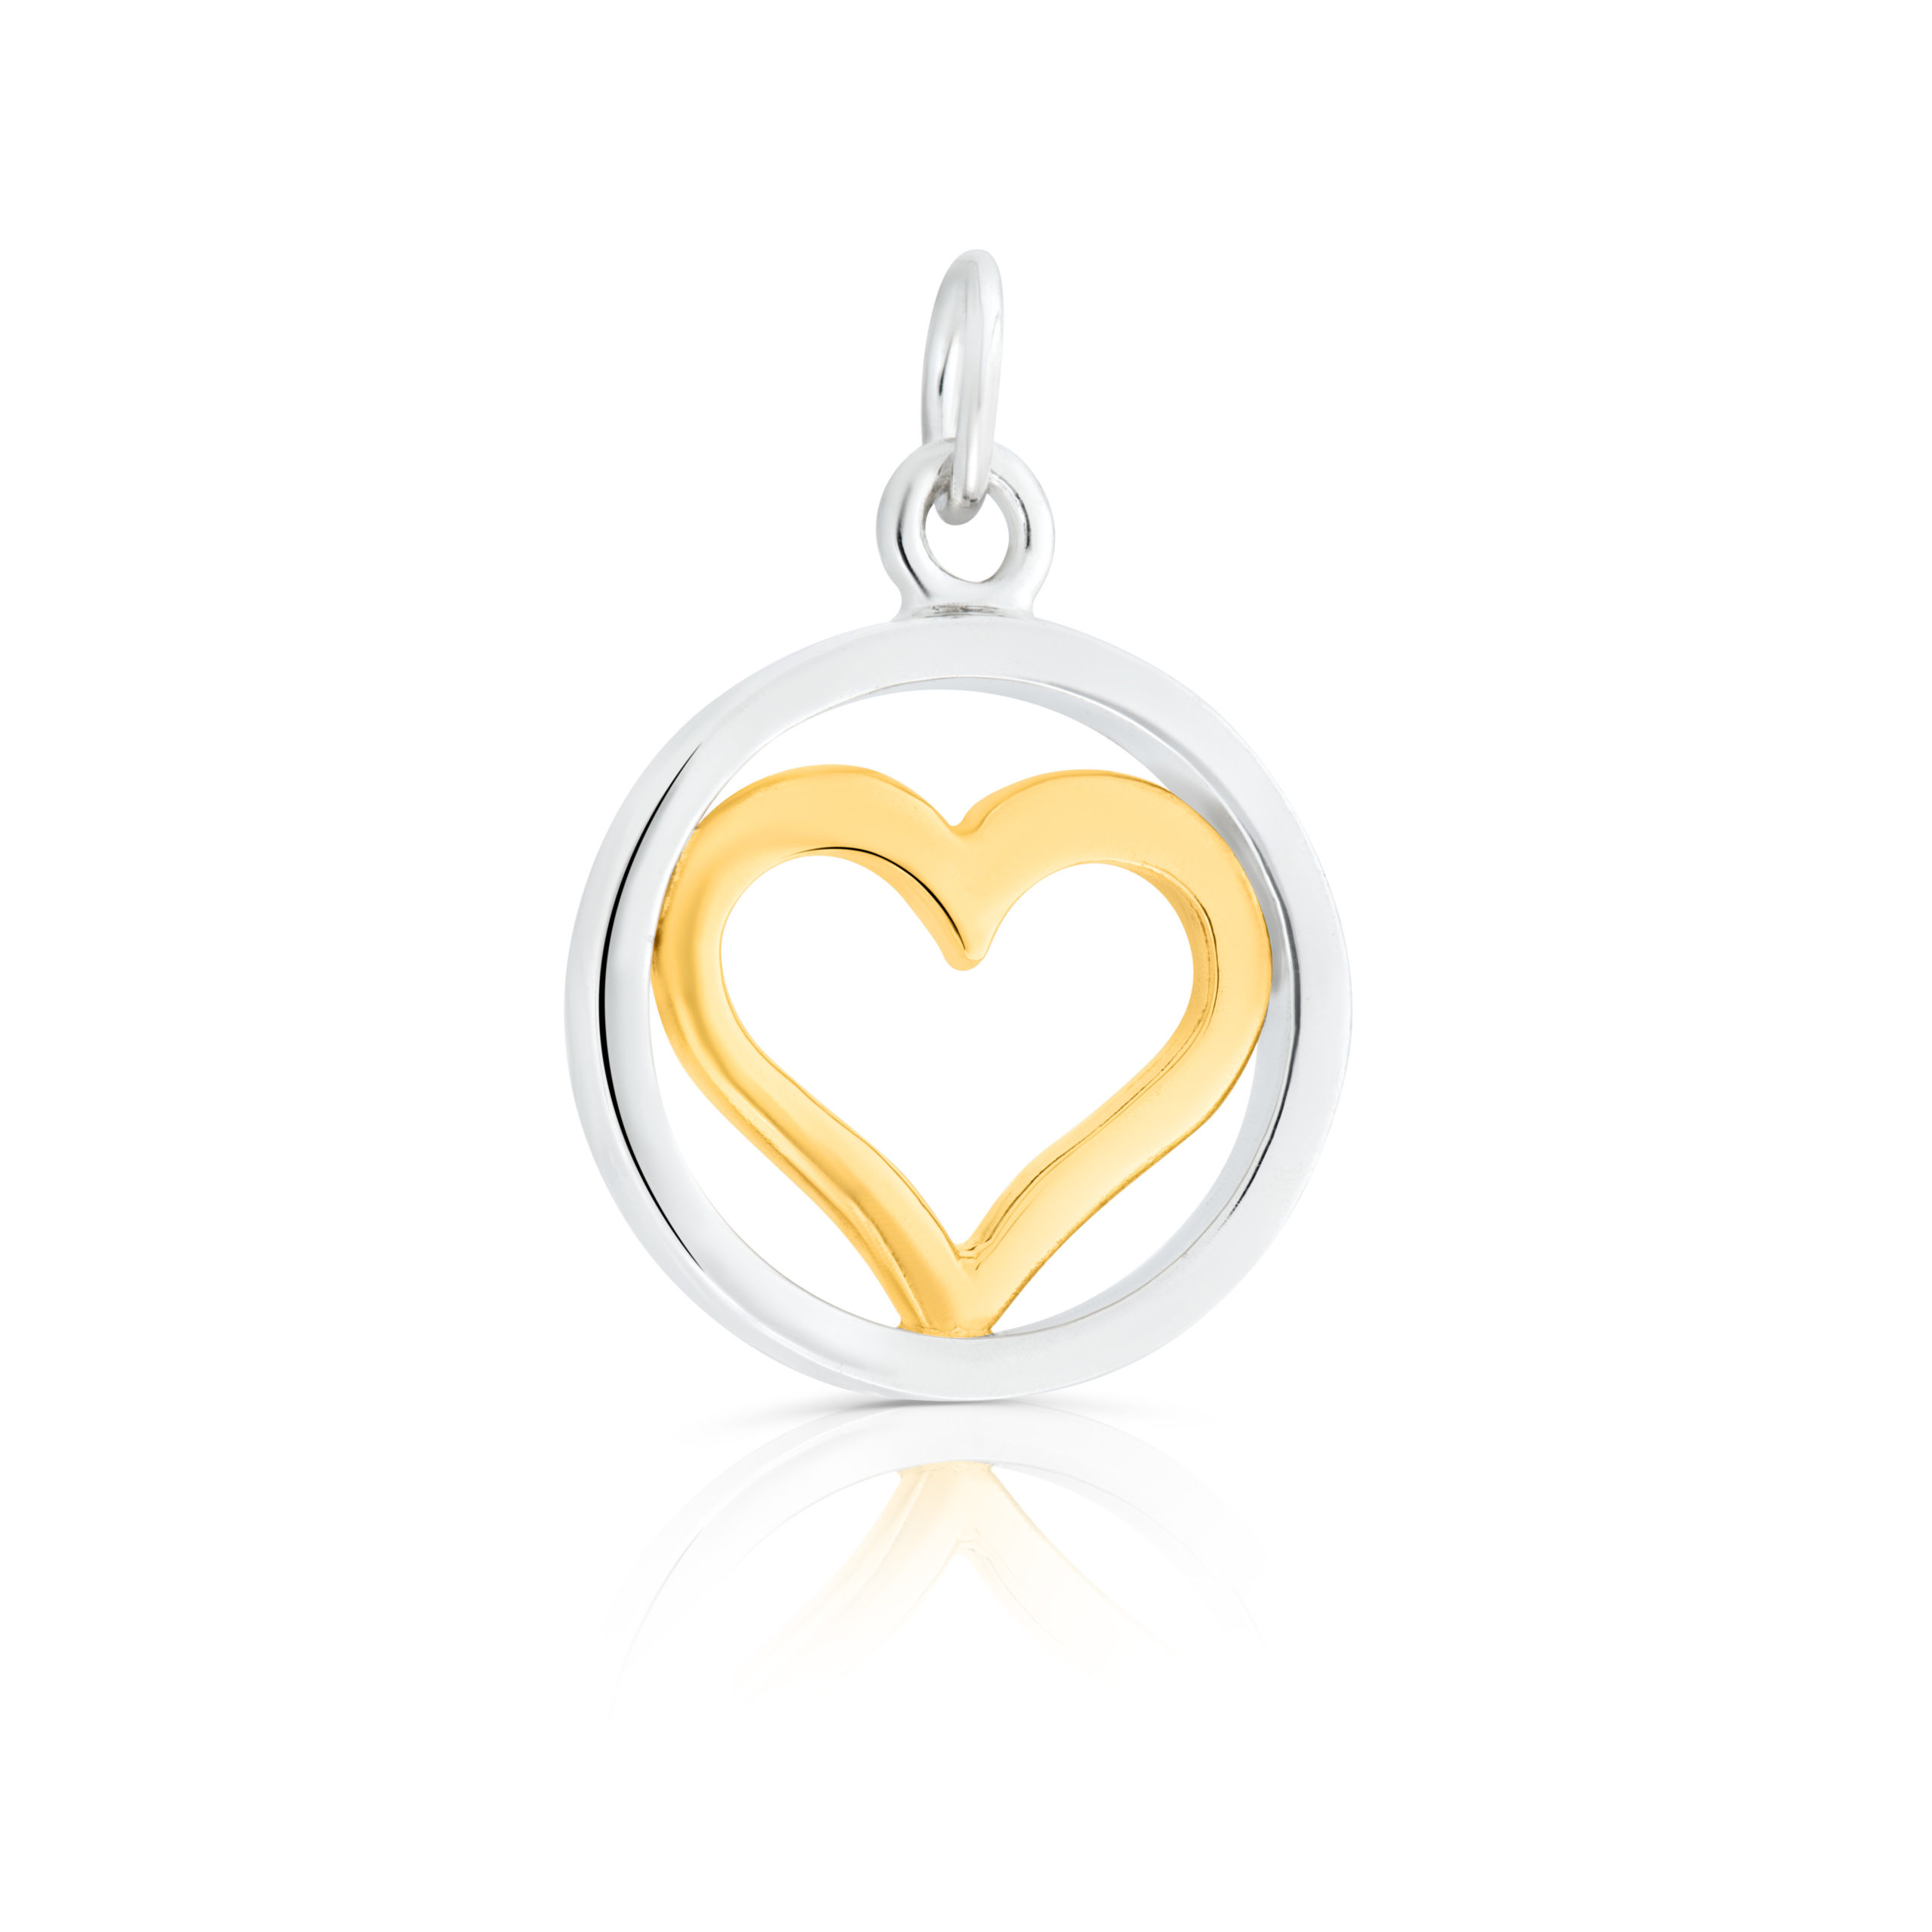 Sterling Silver and 9ct Yellow Gold Charm / Pendant (Live your dreams)